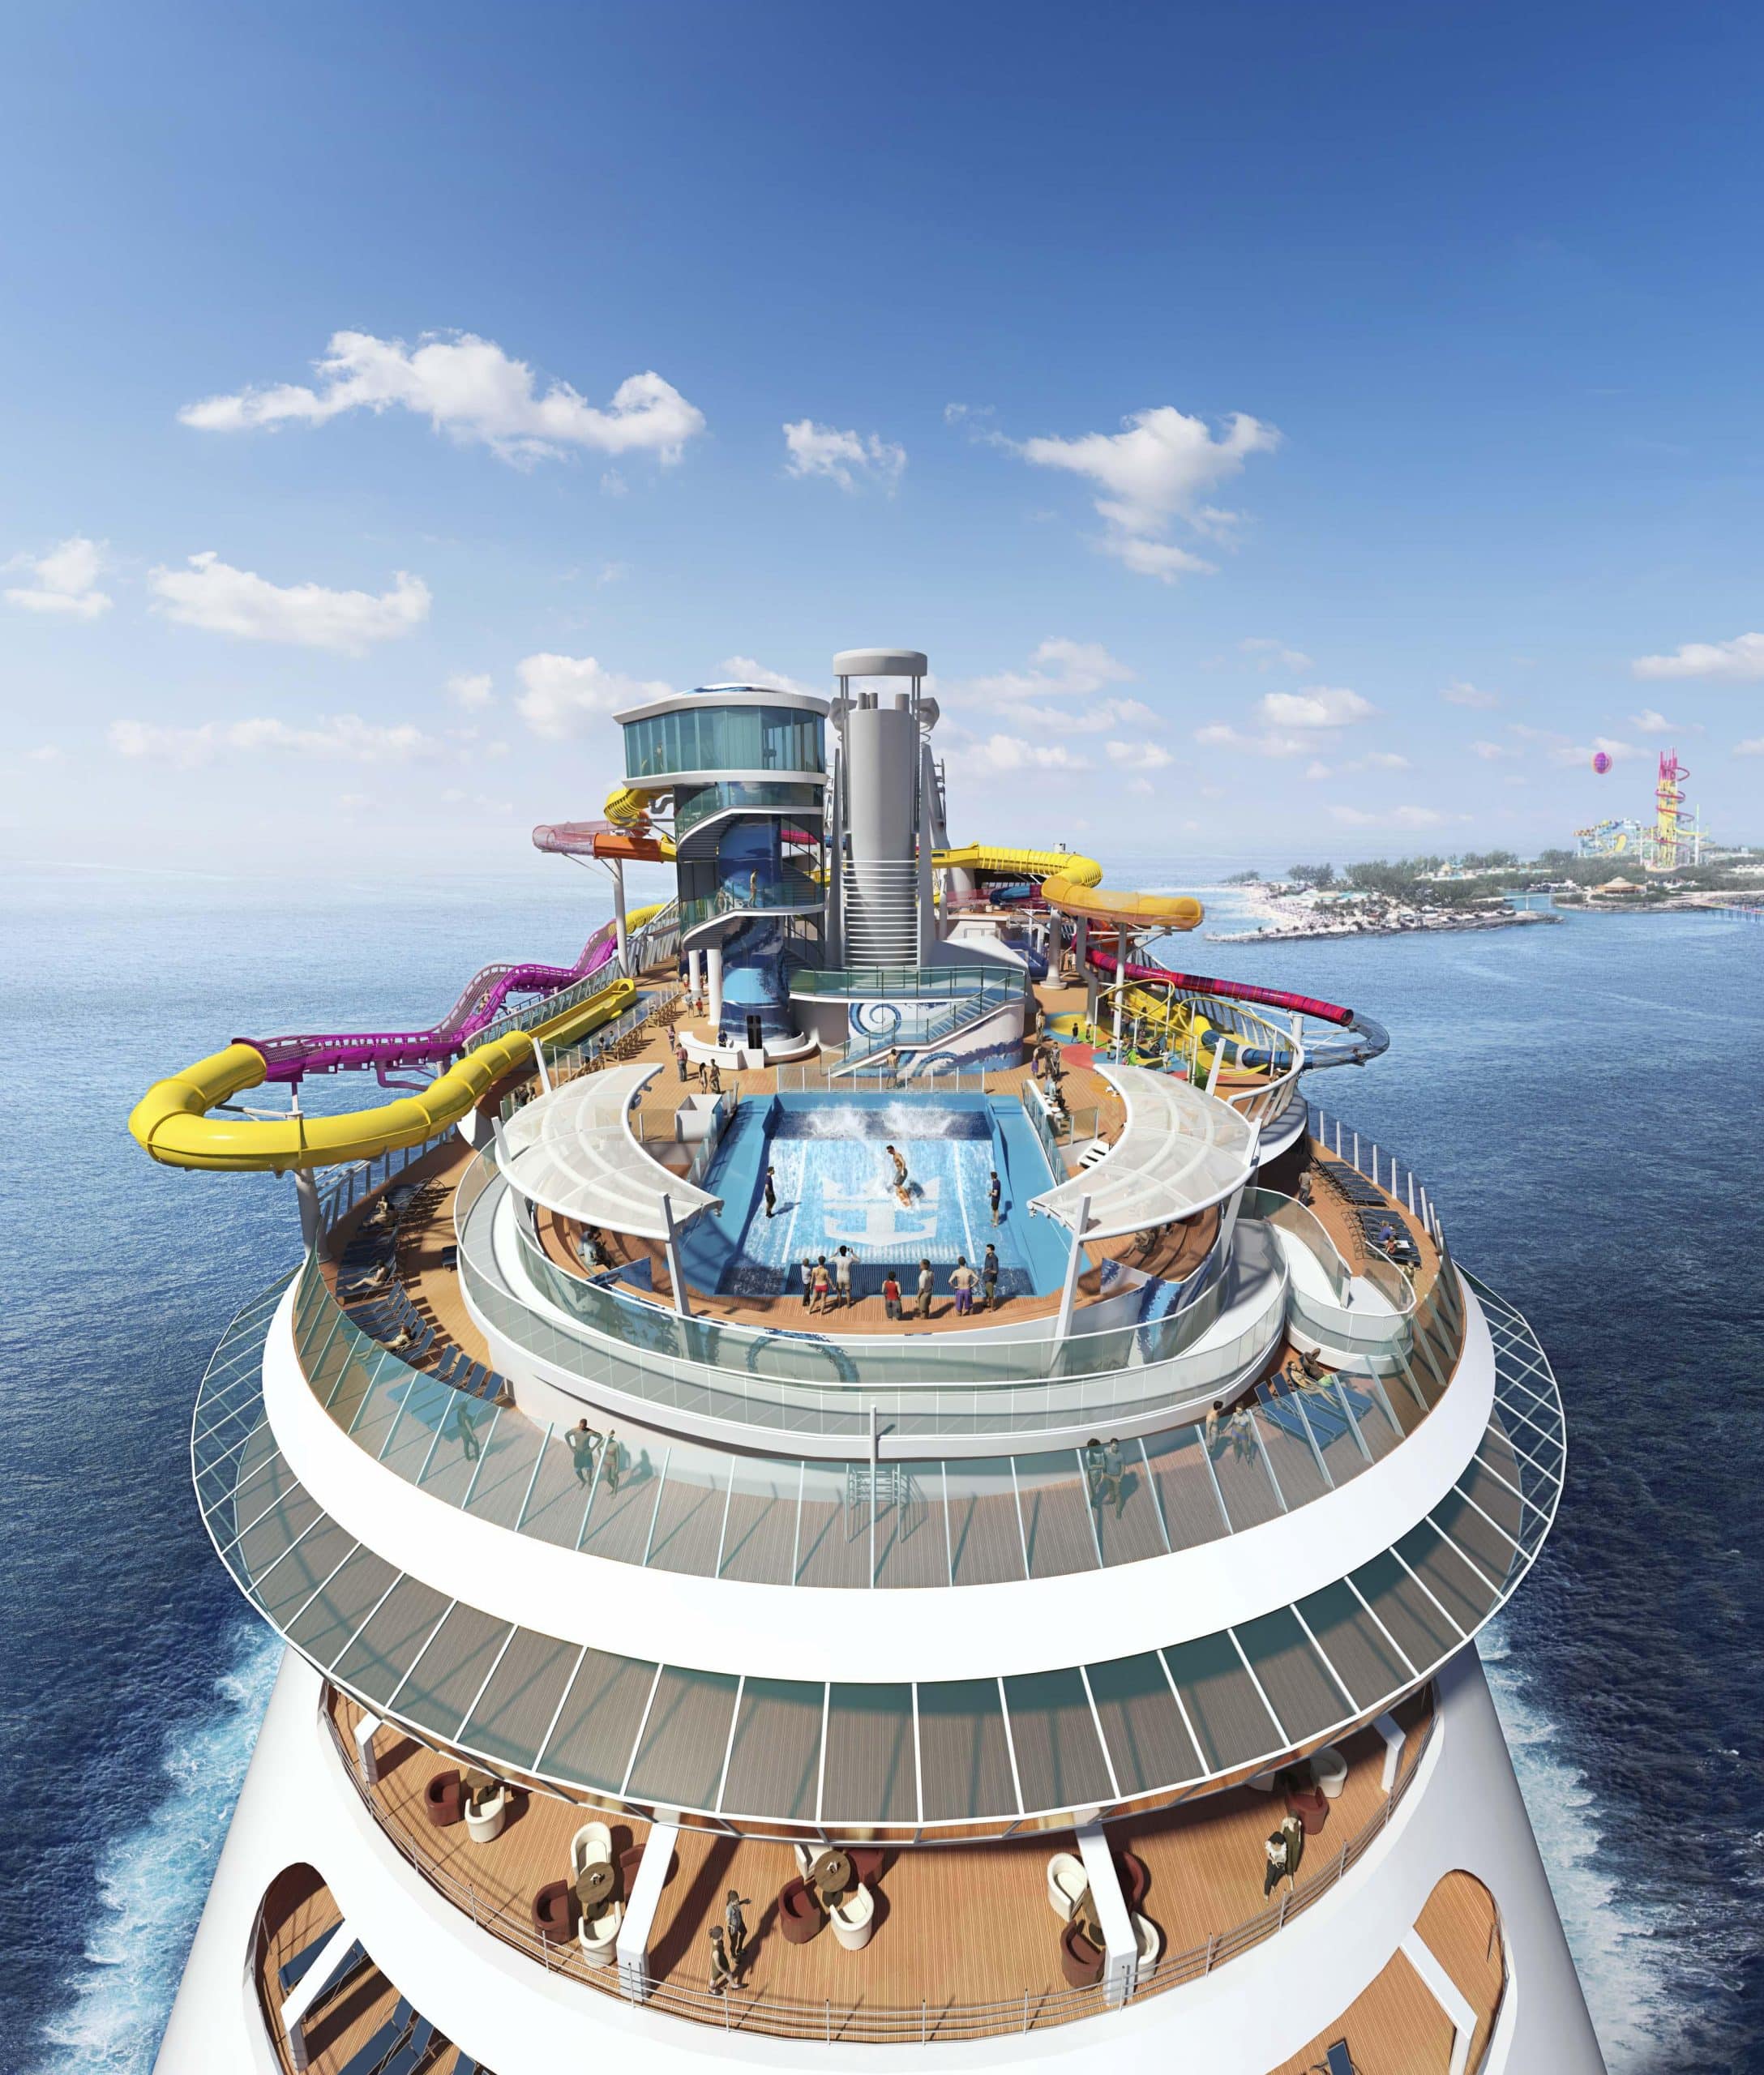 Royal Caribbean unveils the longest waterslide at sea in the world ...